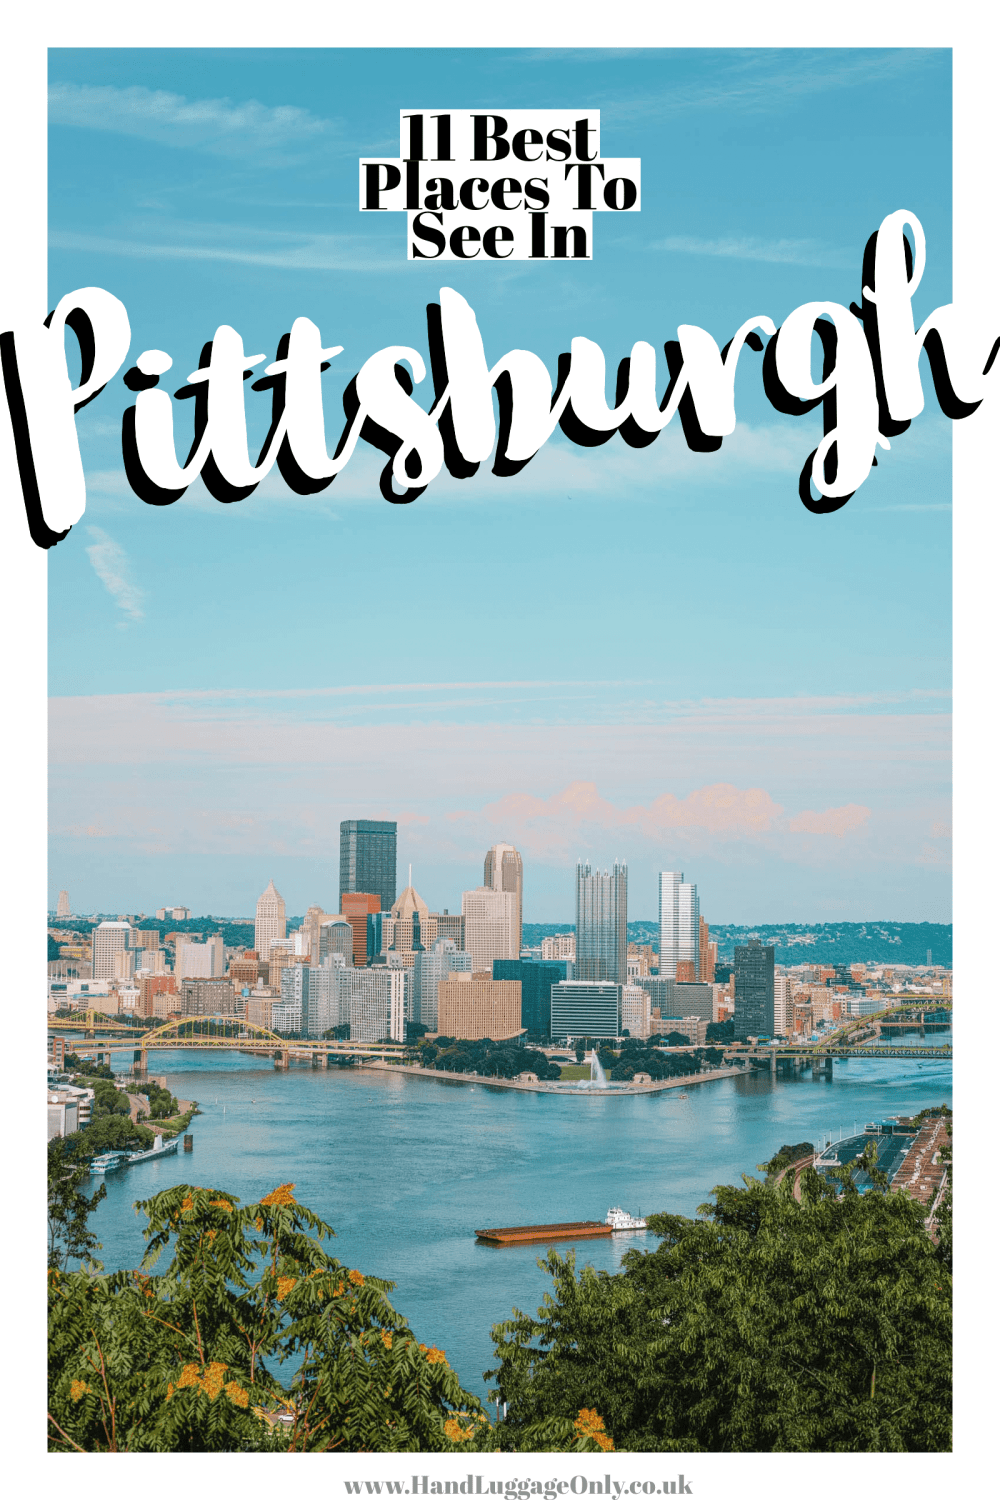 Best Things To Do In Pittsburgh (1)